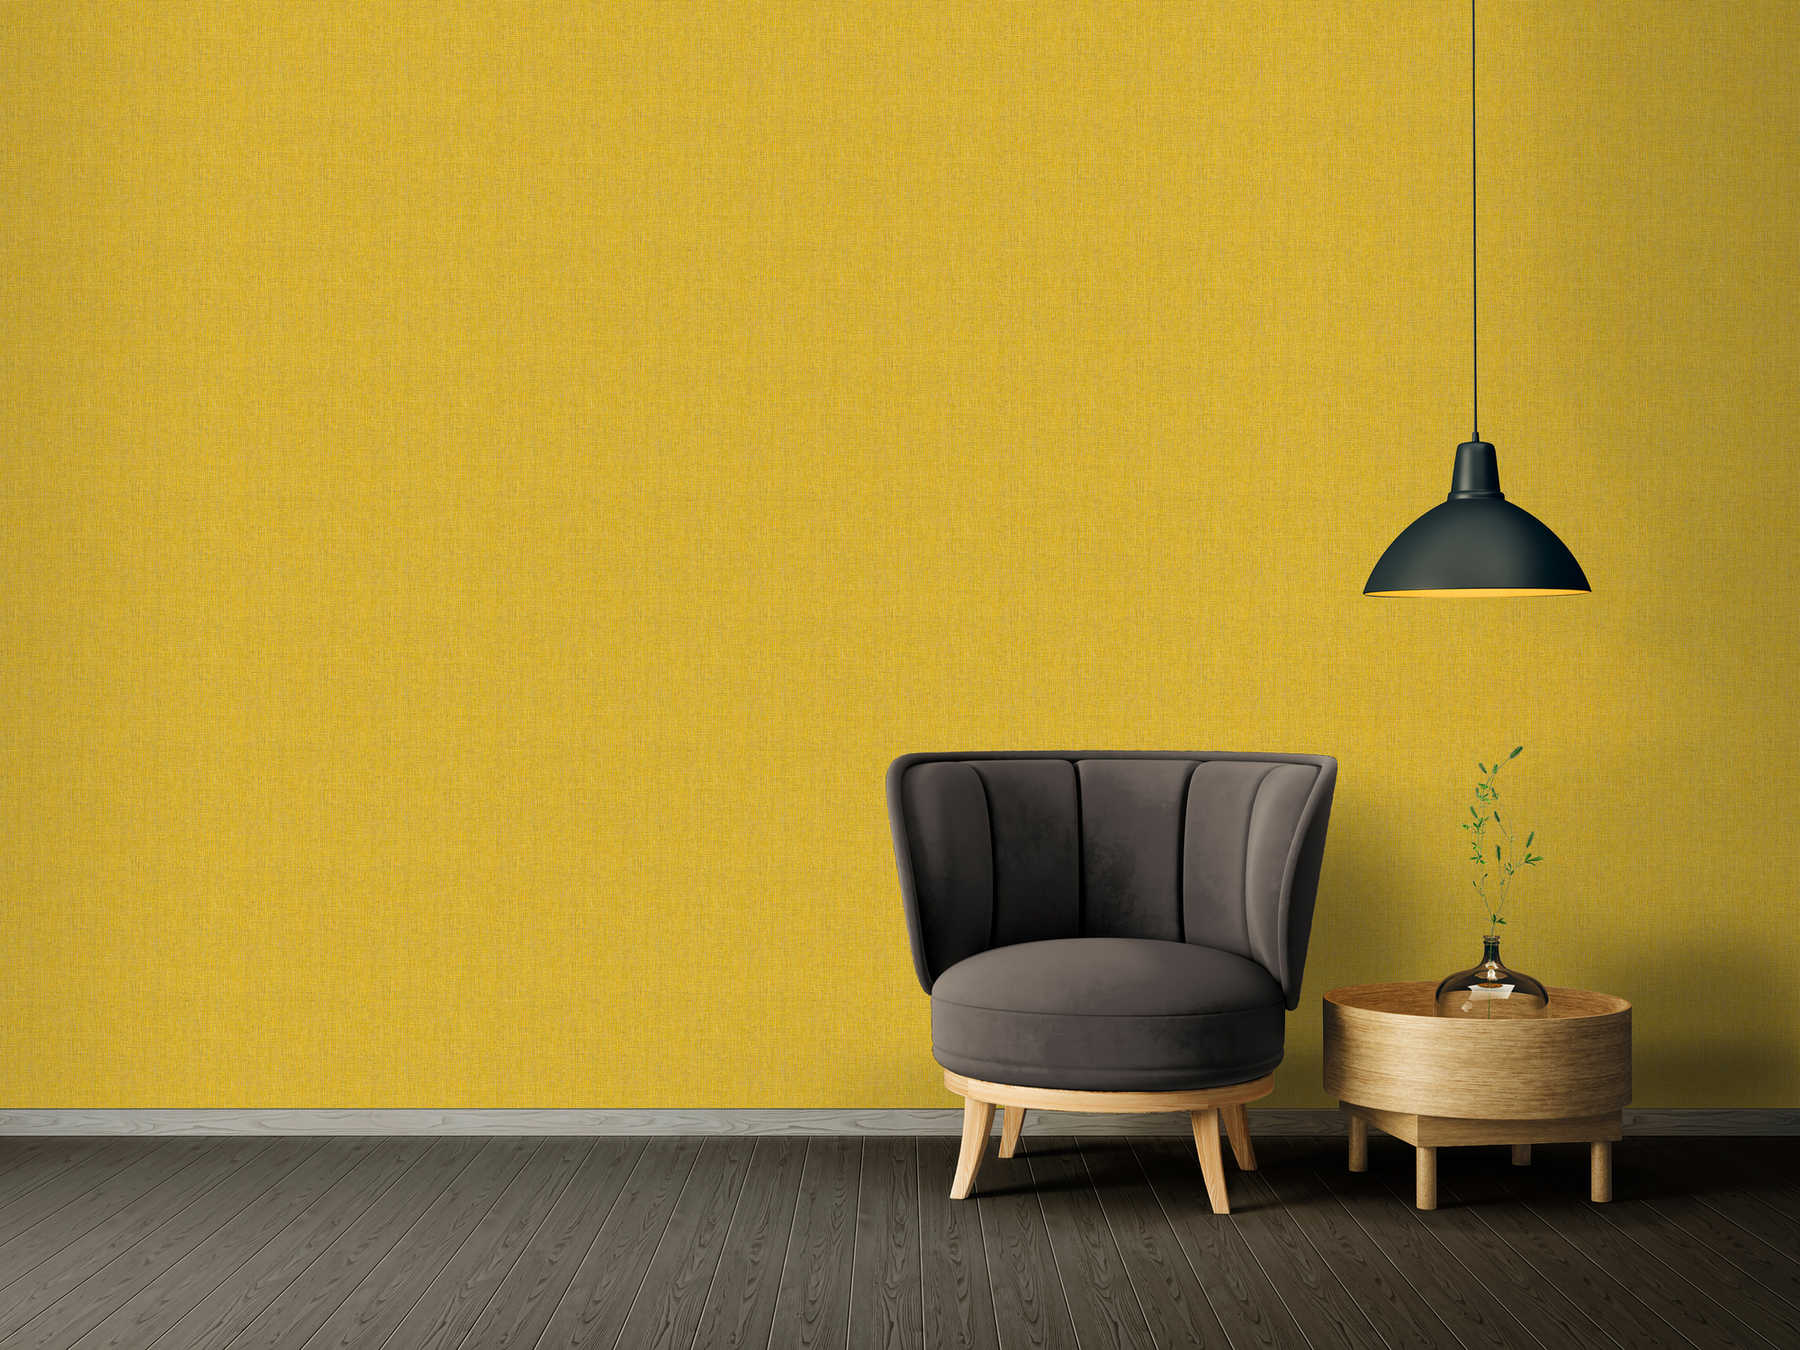             Plain wallpaper textile look with details in silver & grey - yellow, grey, silver
        